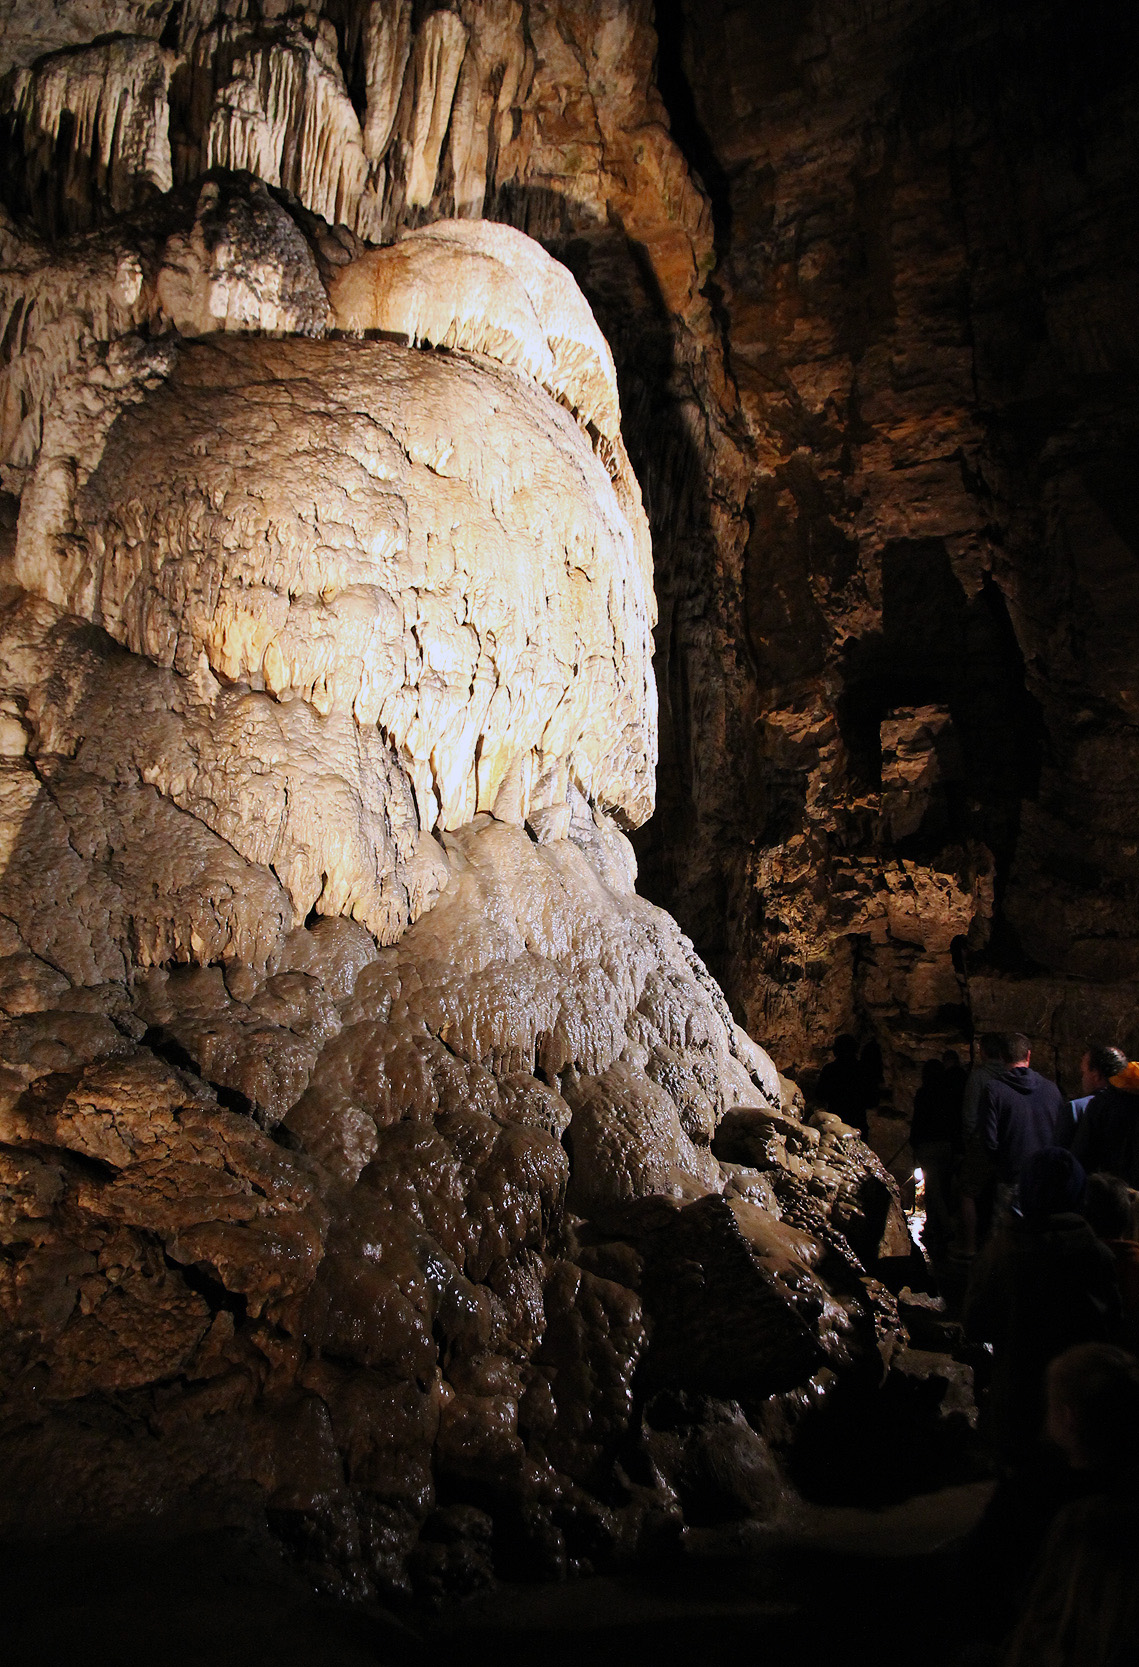 The trophy: an enormous (20m circumference and 7m high!) stalagmite.